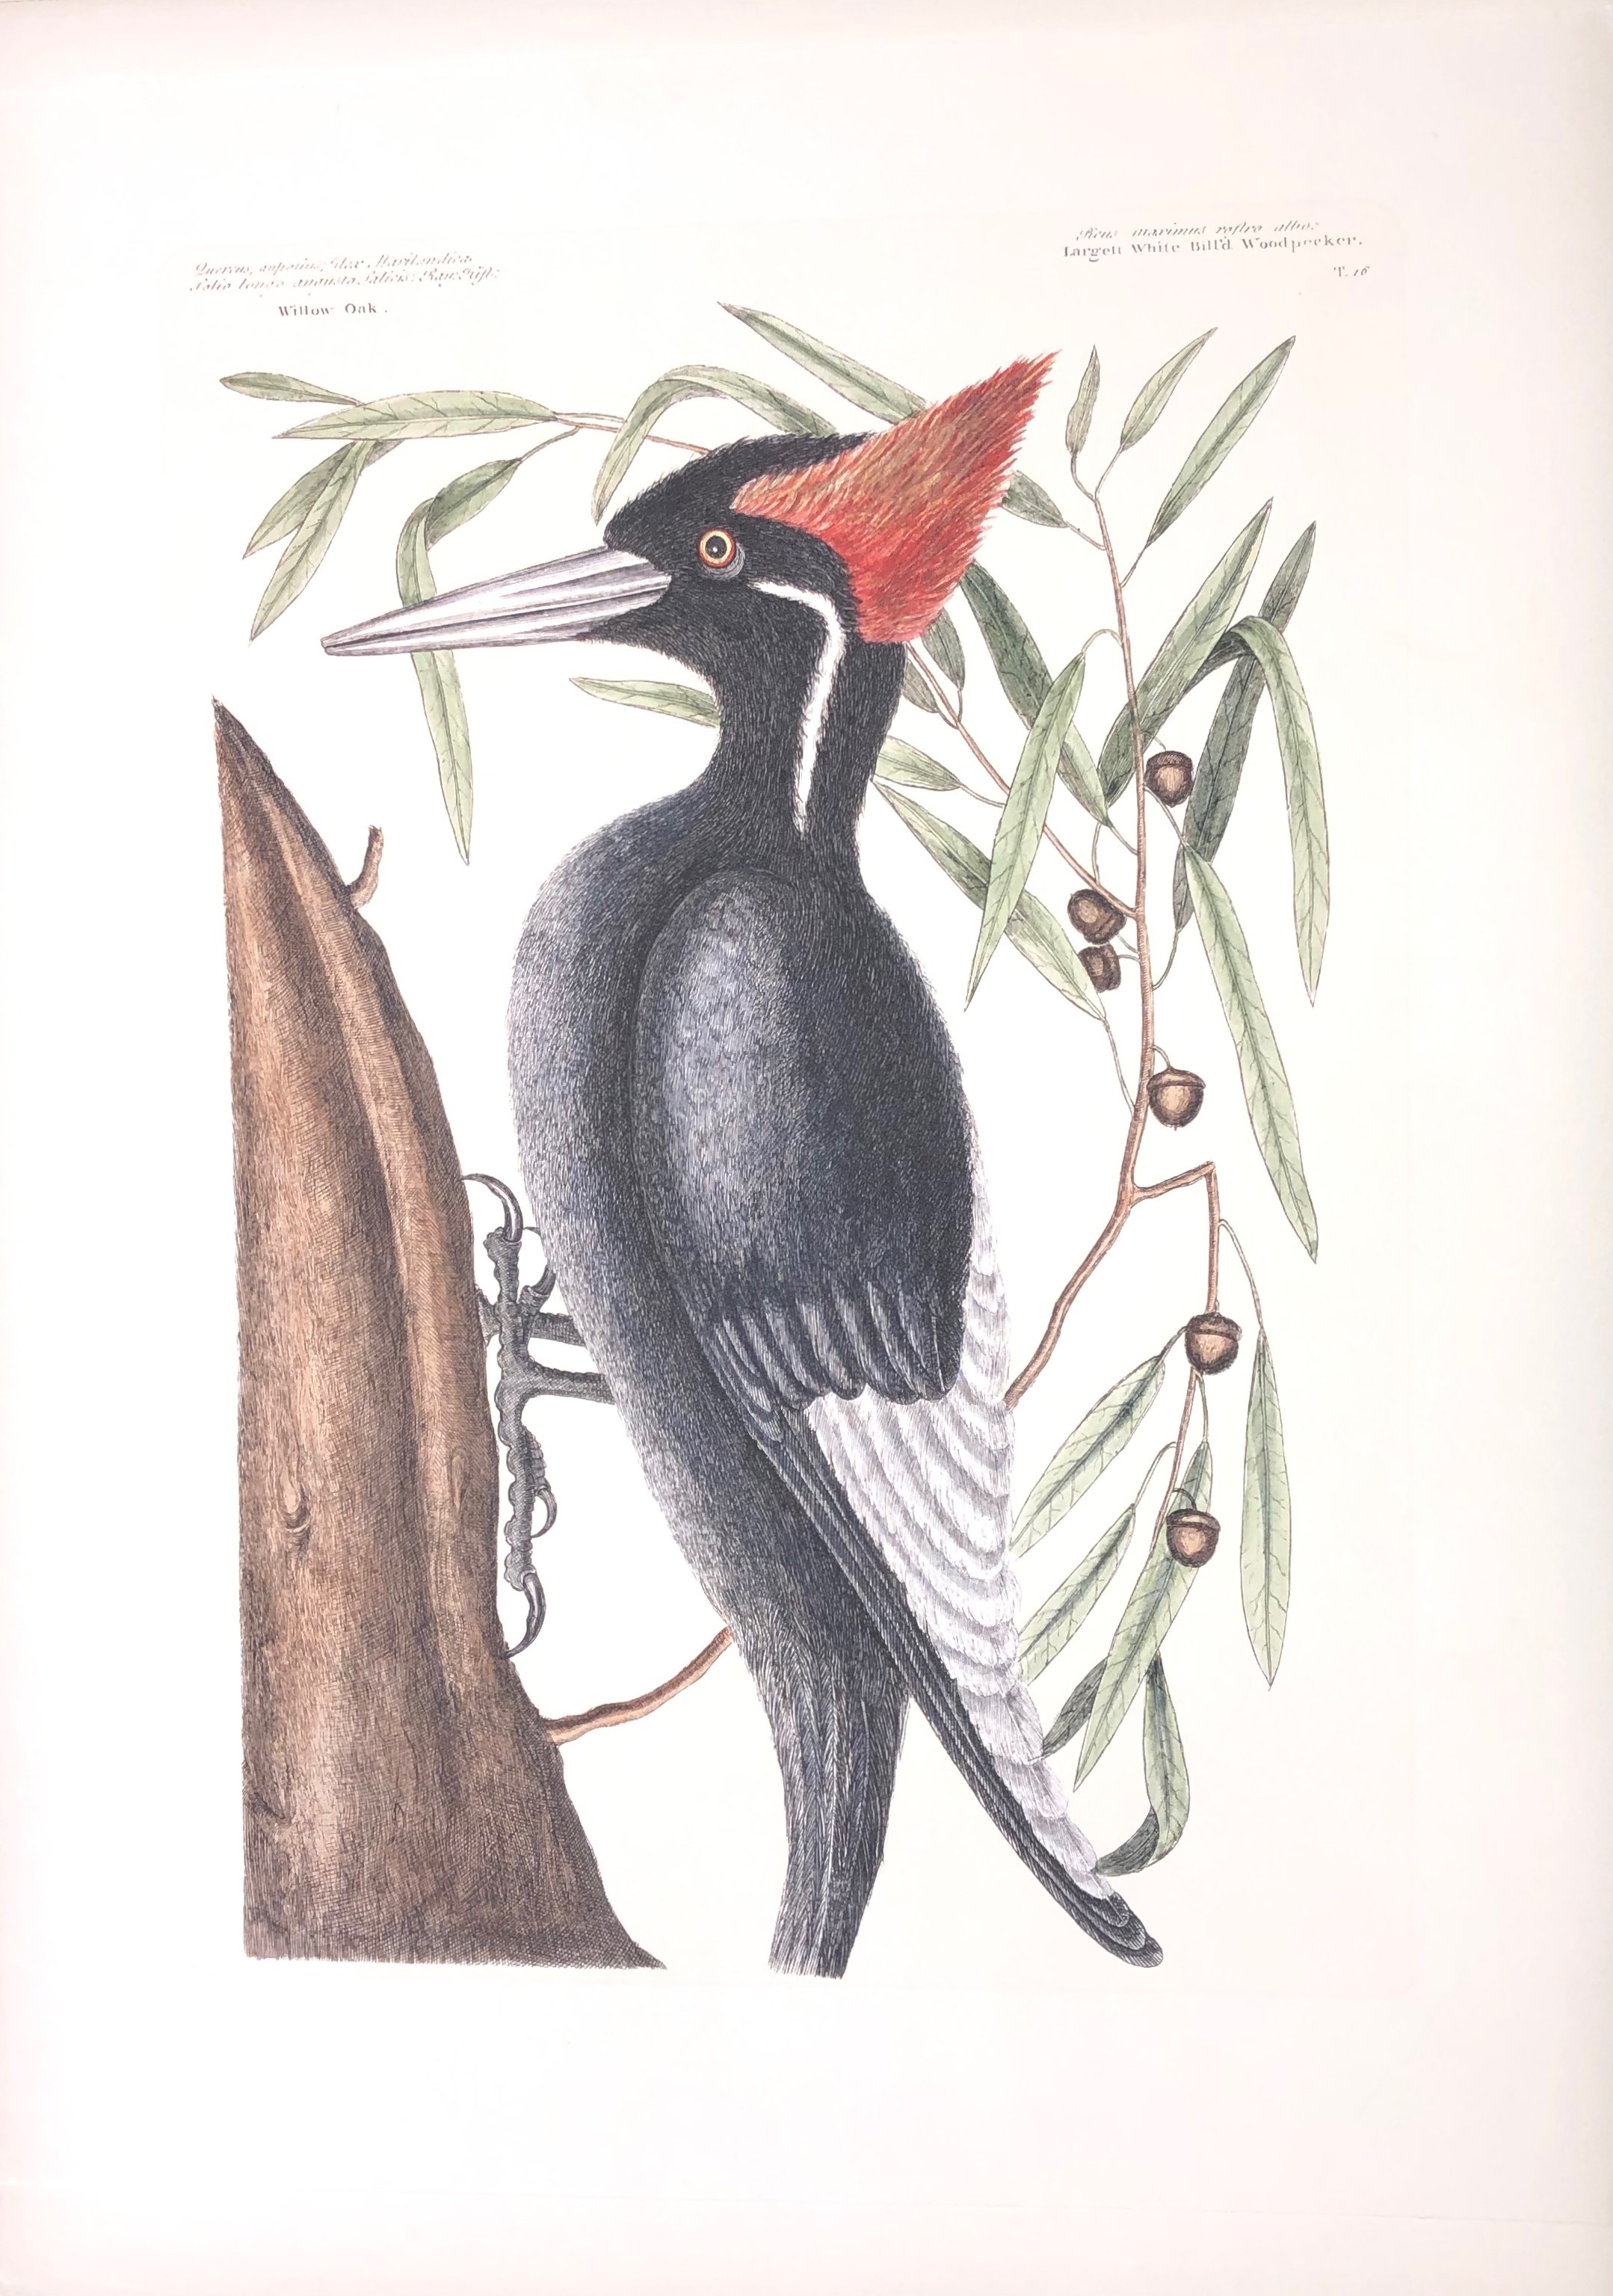 The Ivory Billed Woodpecker